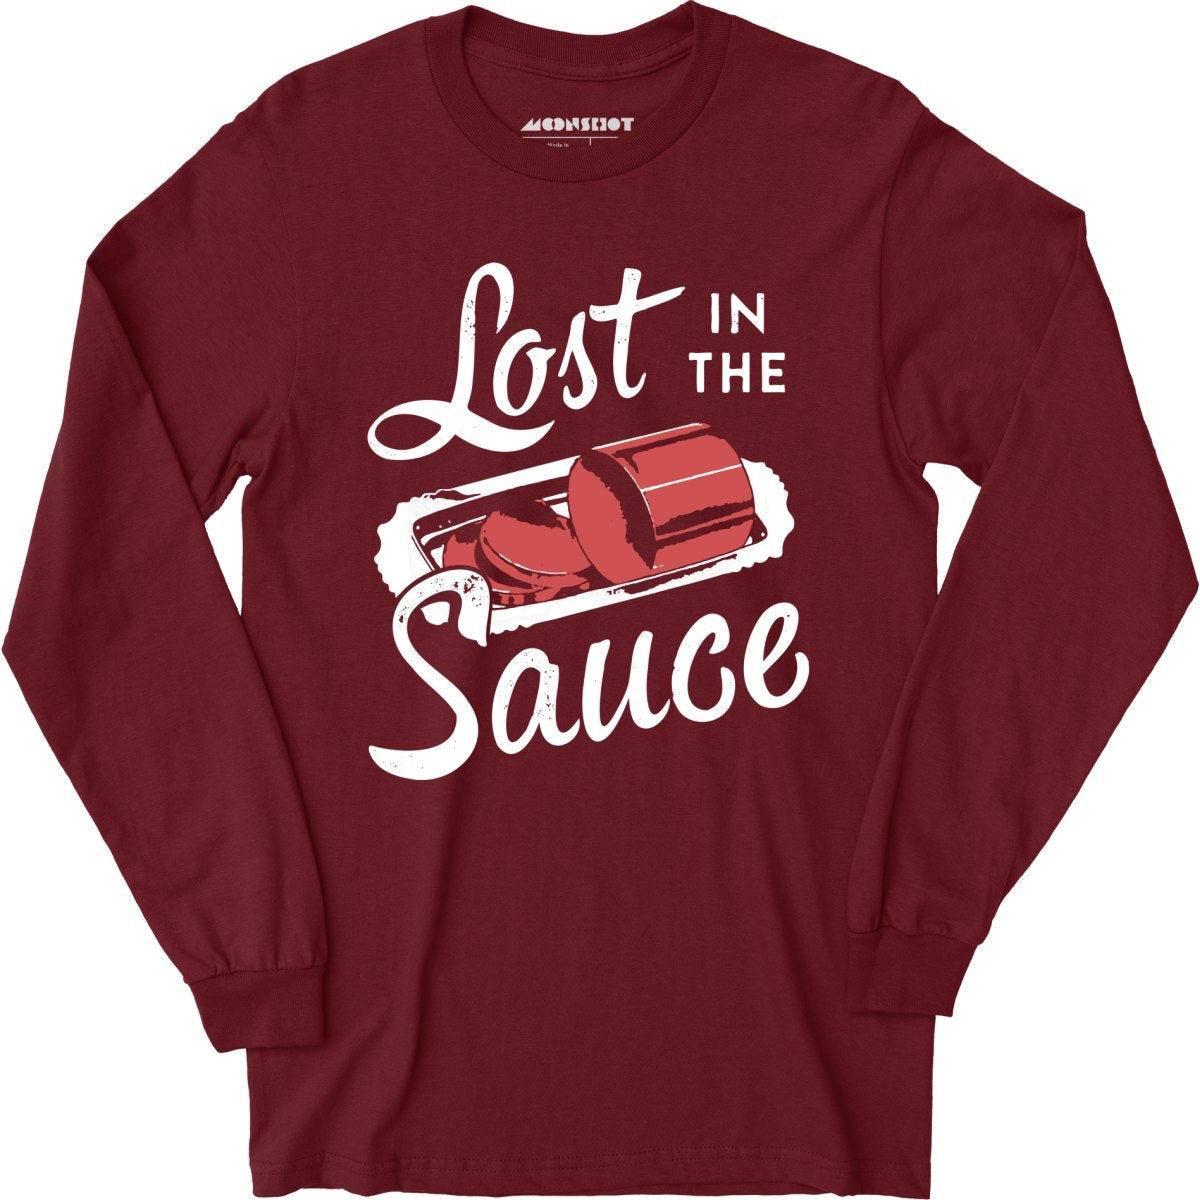 Lost in the Sauce - Long Sleeve T-Shirt